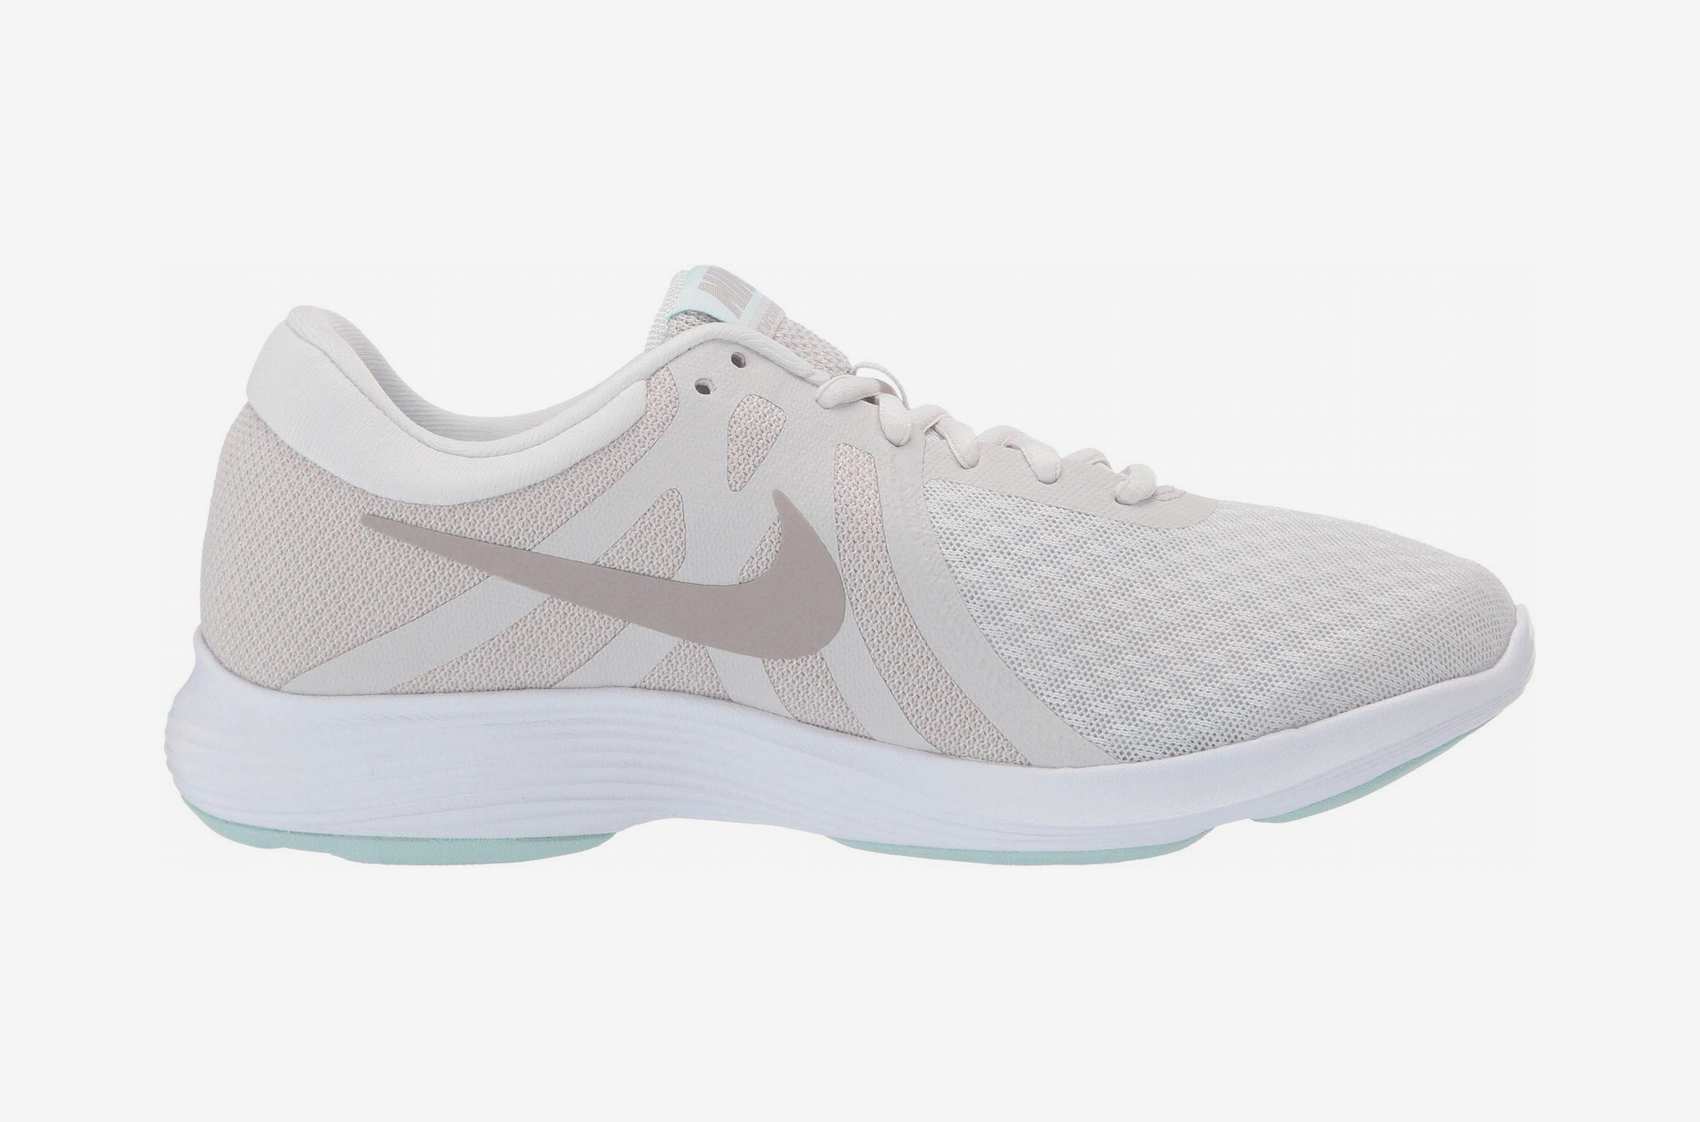 expensive tennis shoes for women